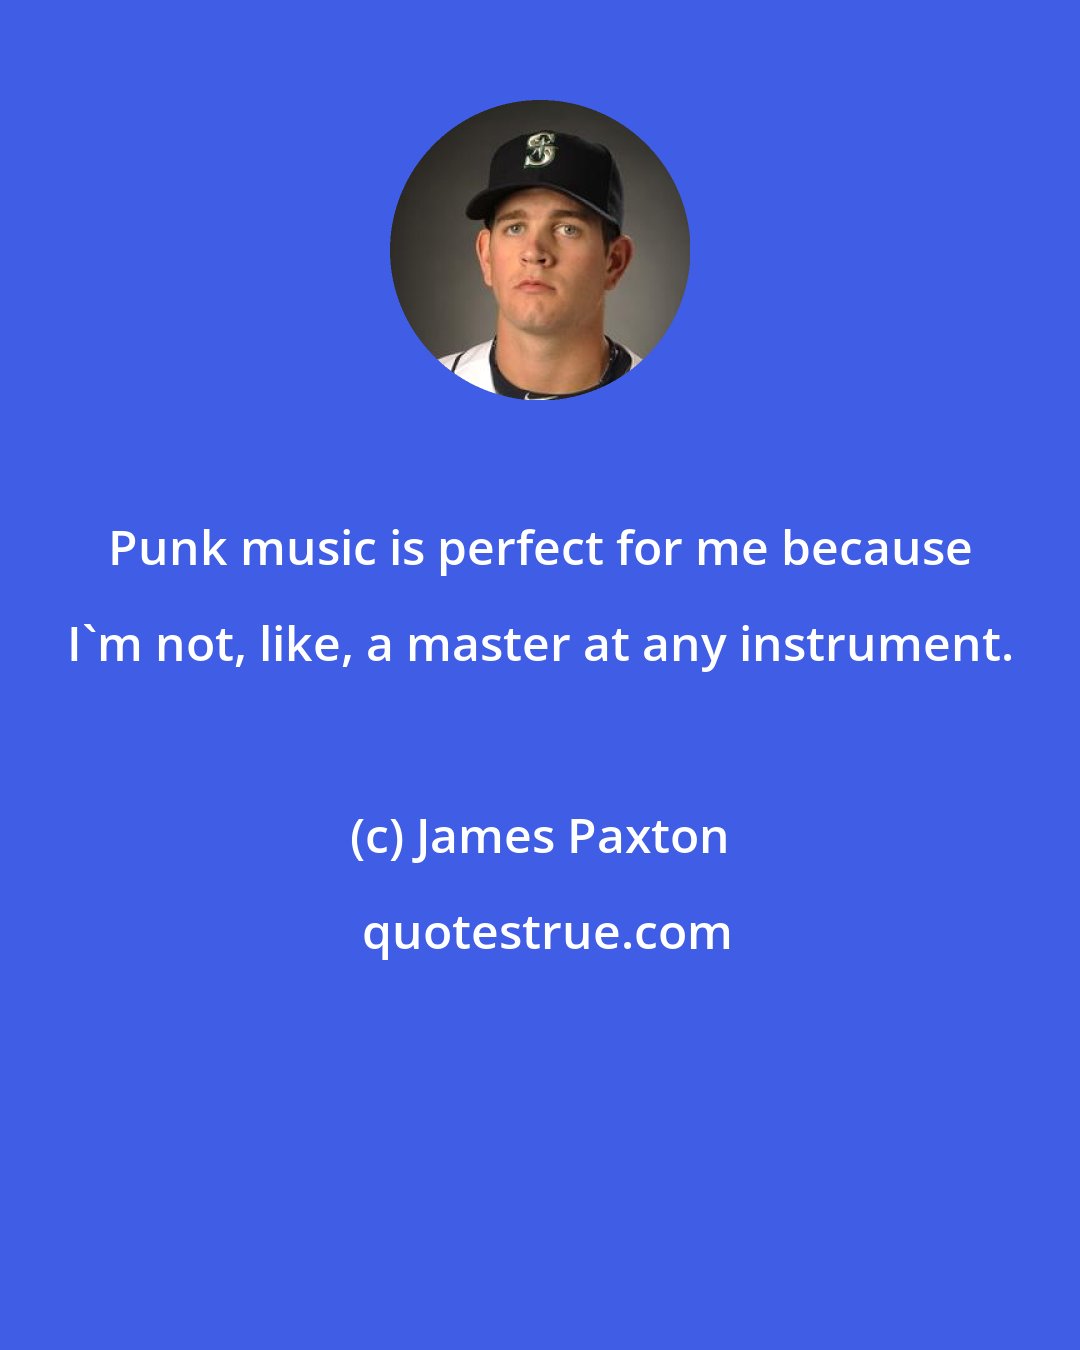 James Paxton: Punk music is perfect for me because I'm not, like, a master at any instrument.